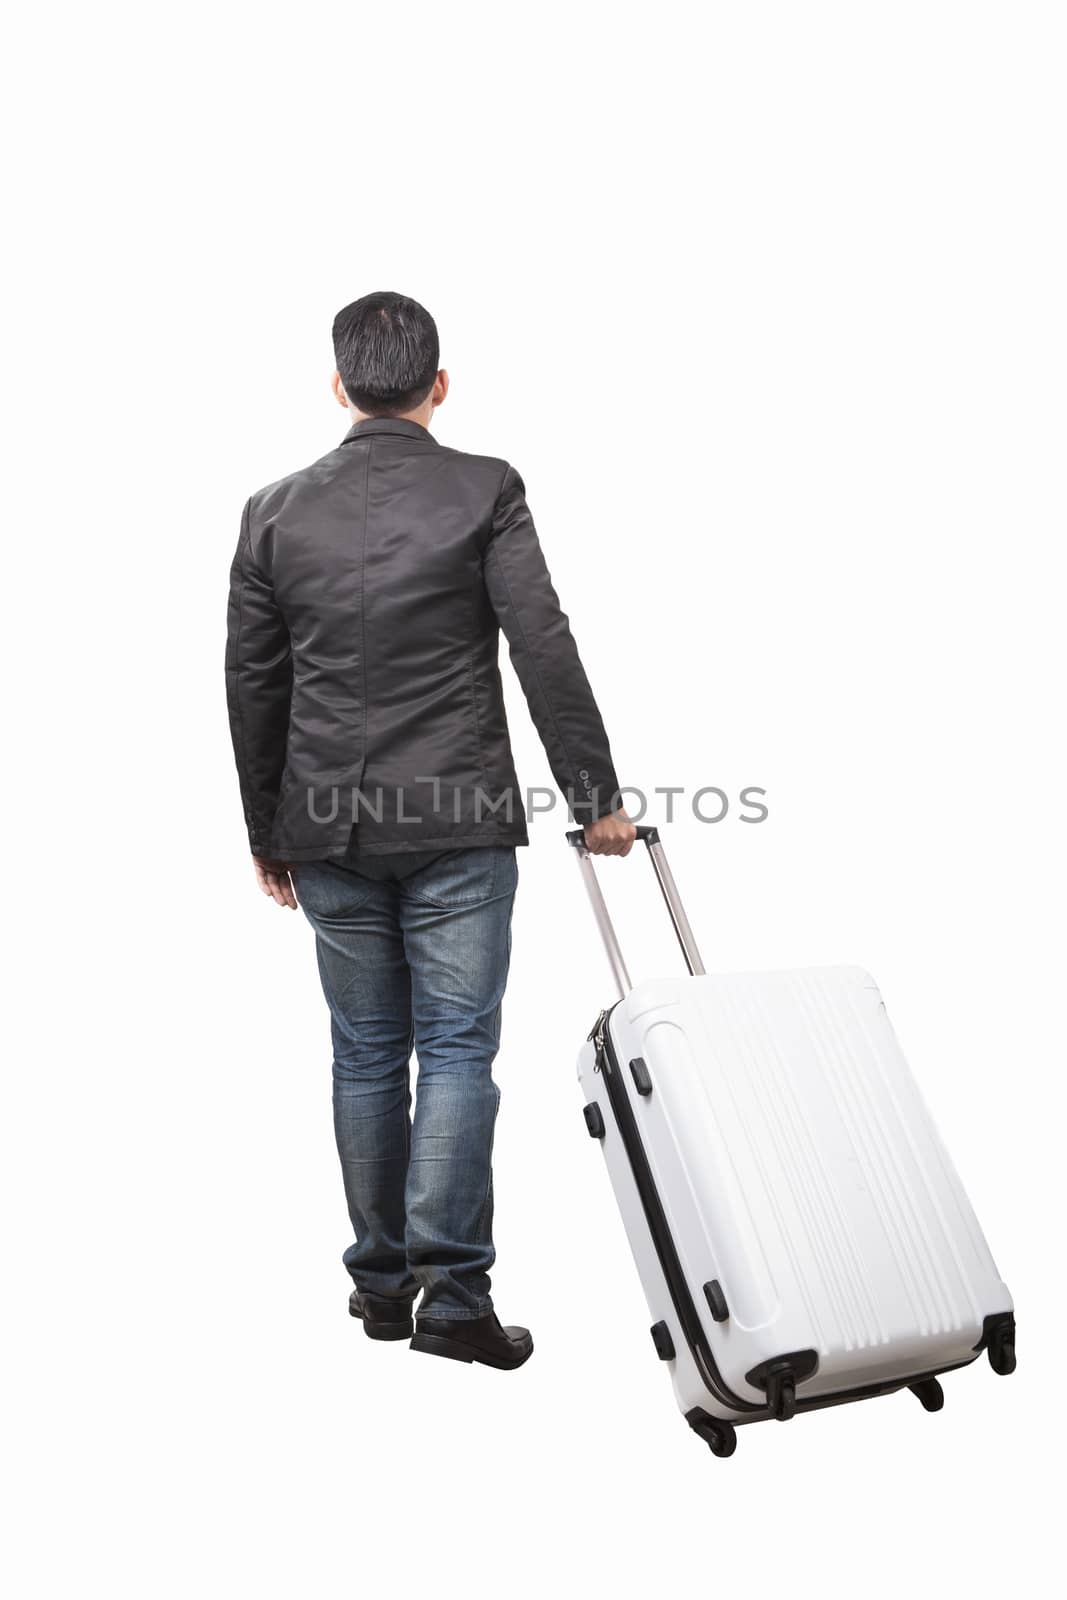 rear view of young man and pulling belonging luggage walking to by khunaspix